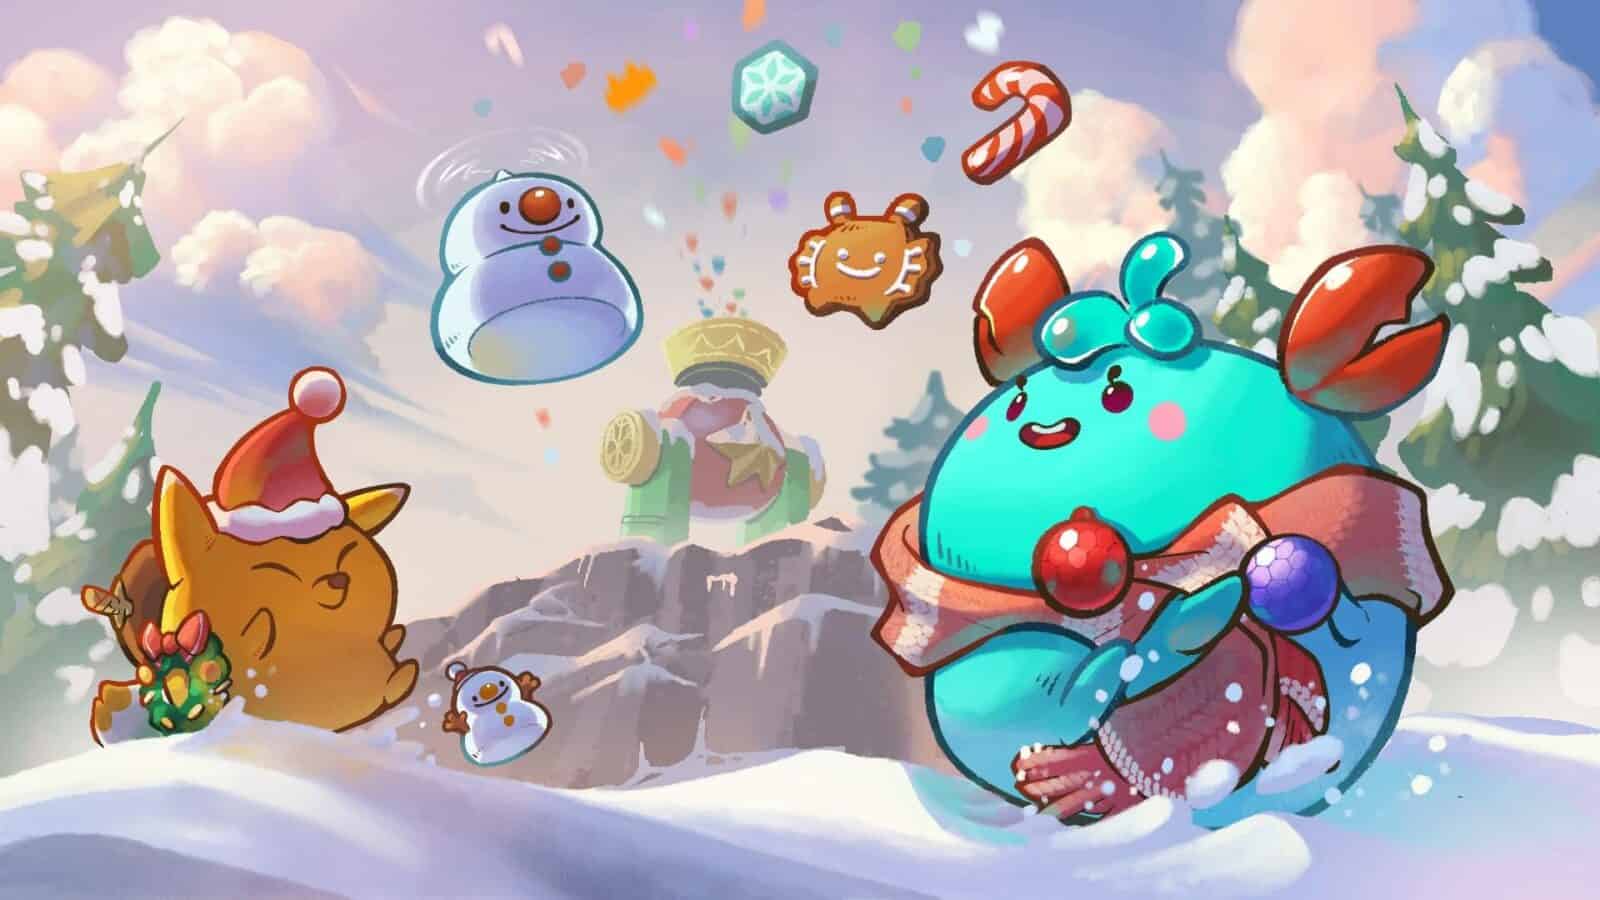 Axie Infinity Invites Fans to Festive Holiday Event